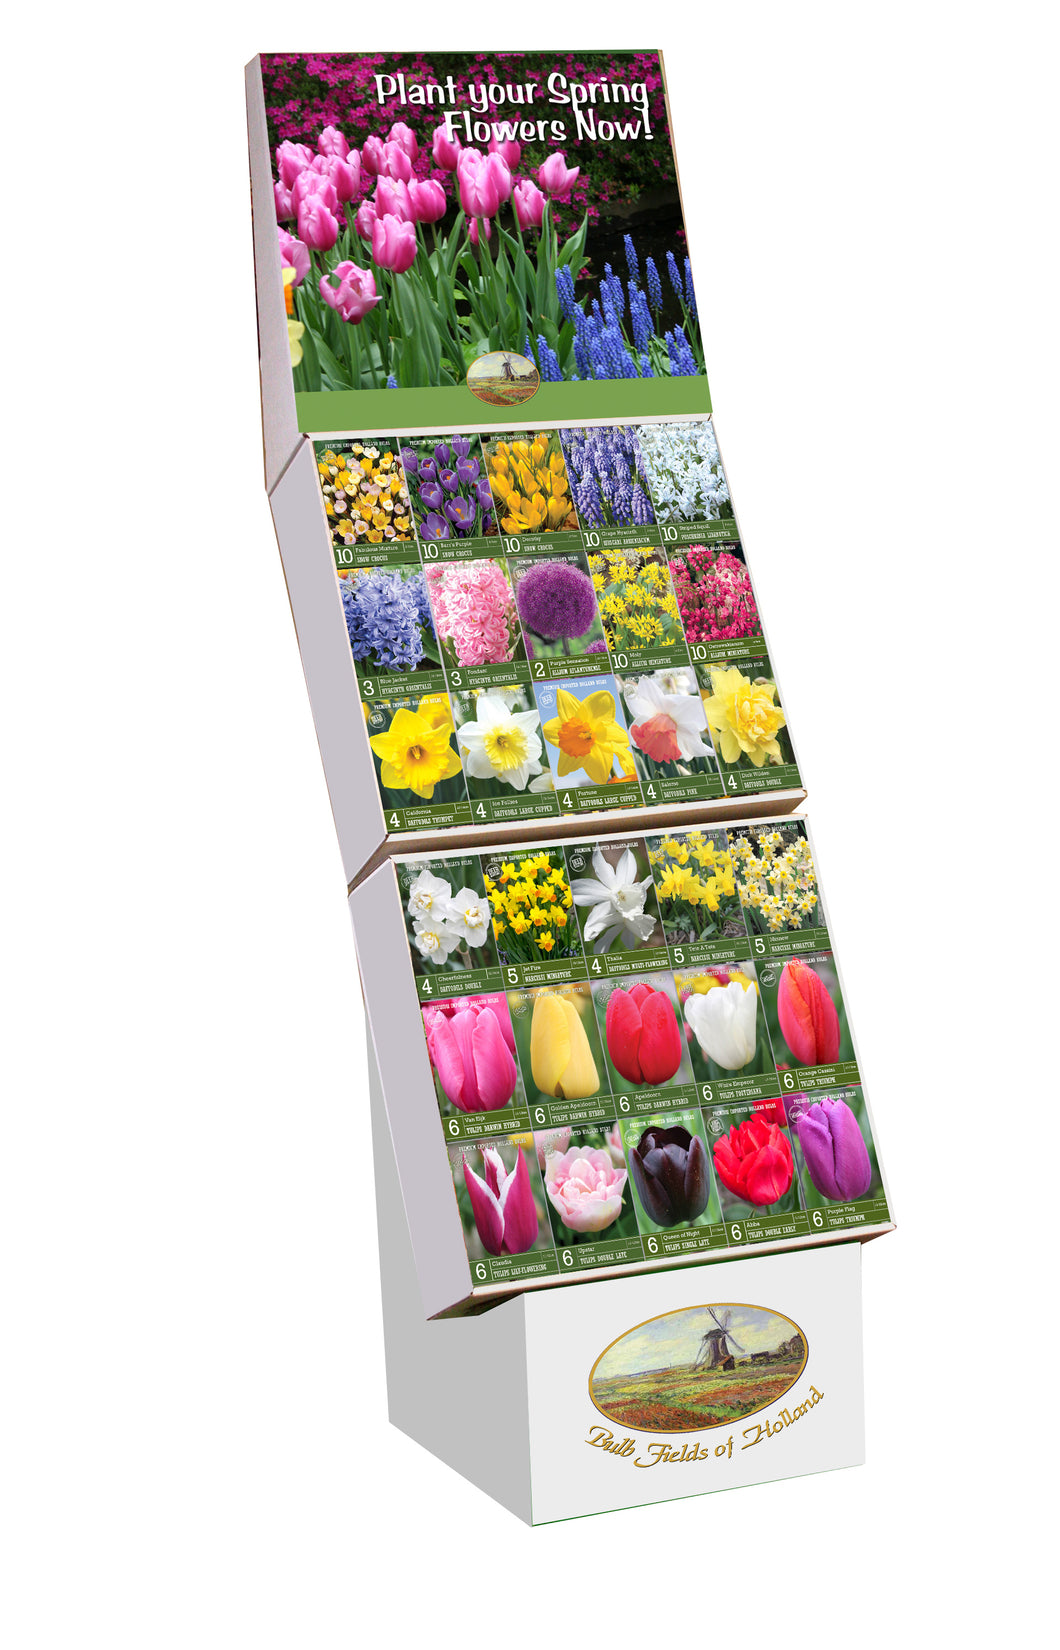 Bulb Fields of Holland Fall Bulb Display in Color Retail Impulse Boxes Unit #25100